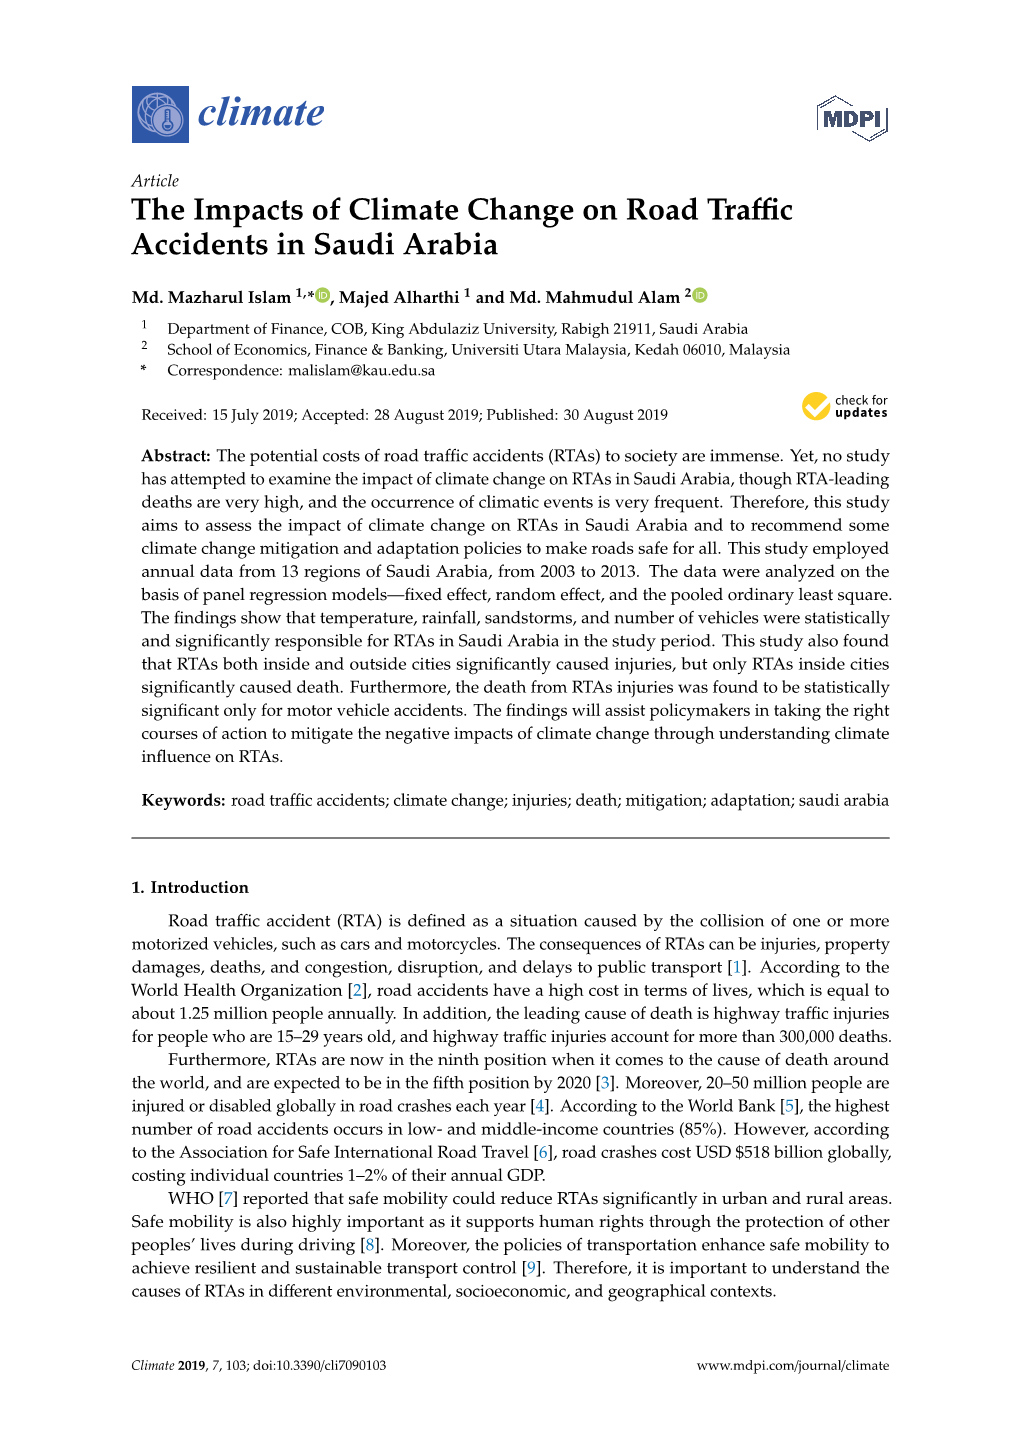 The Impacts of Climate Change on Road Traffic Accidents in Saudi